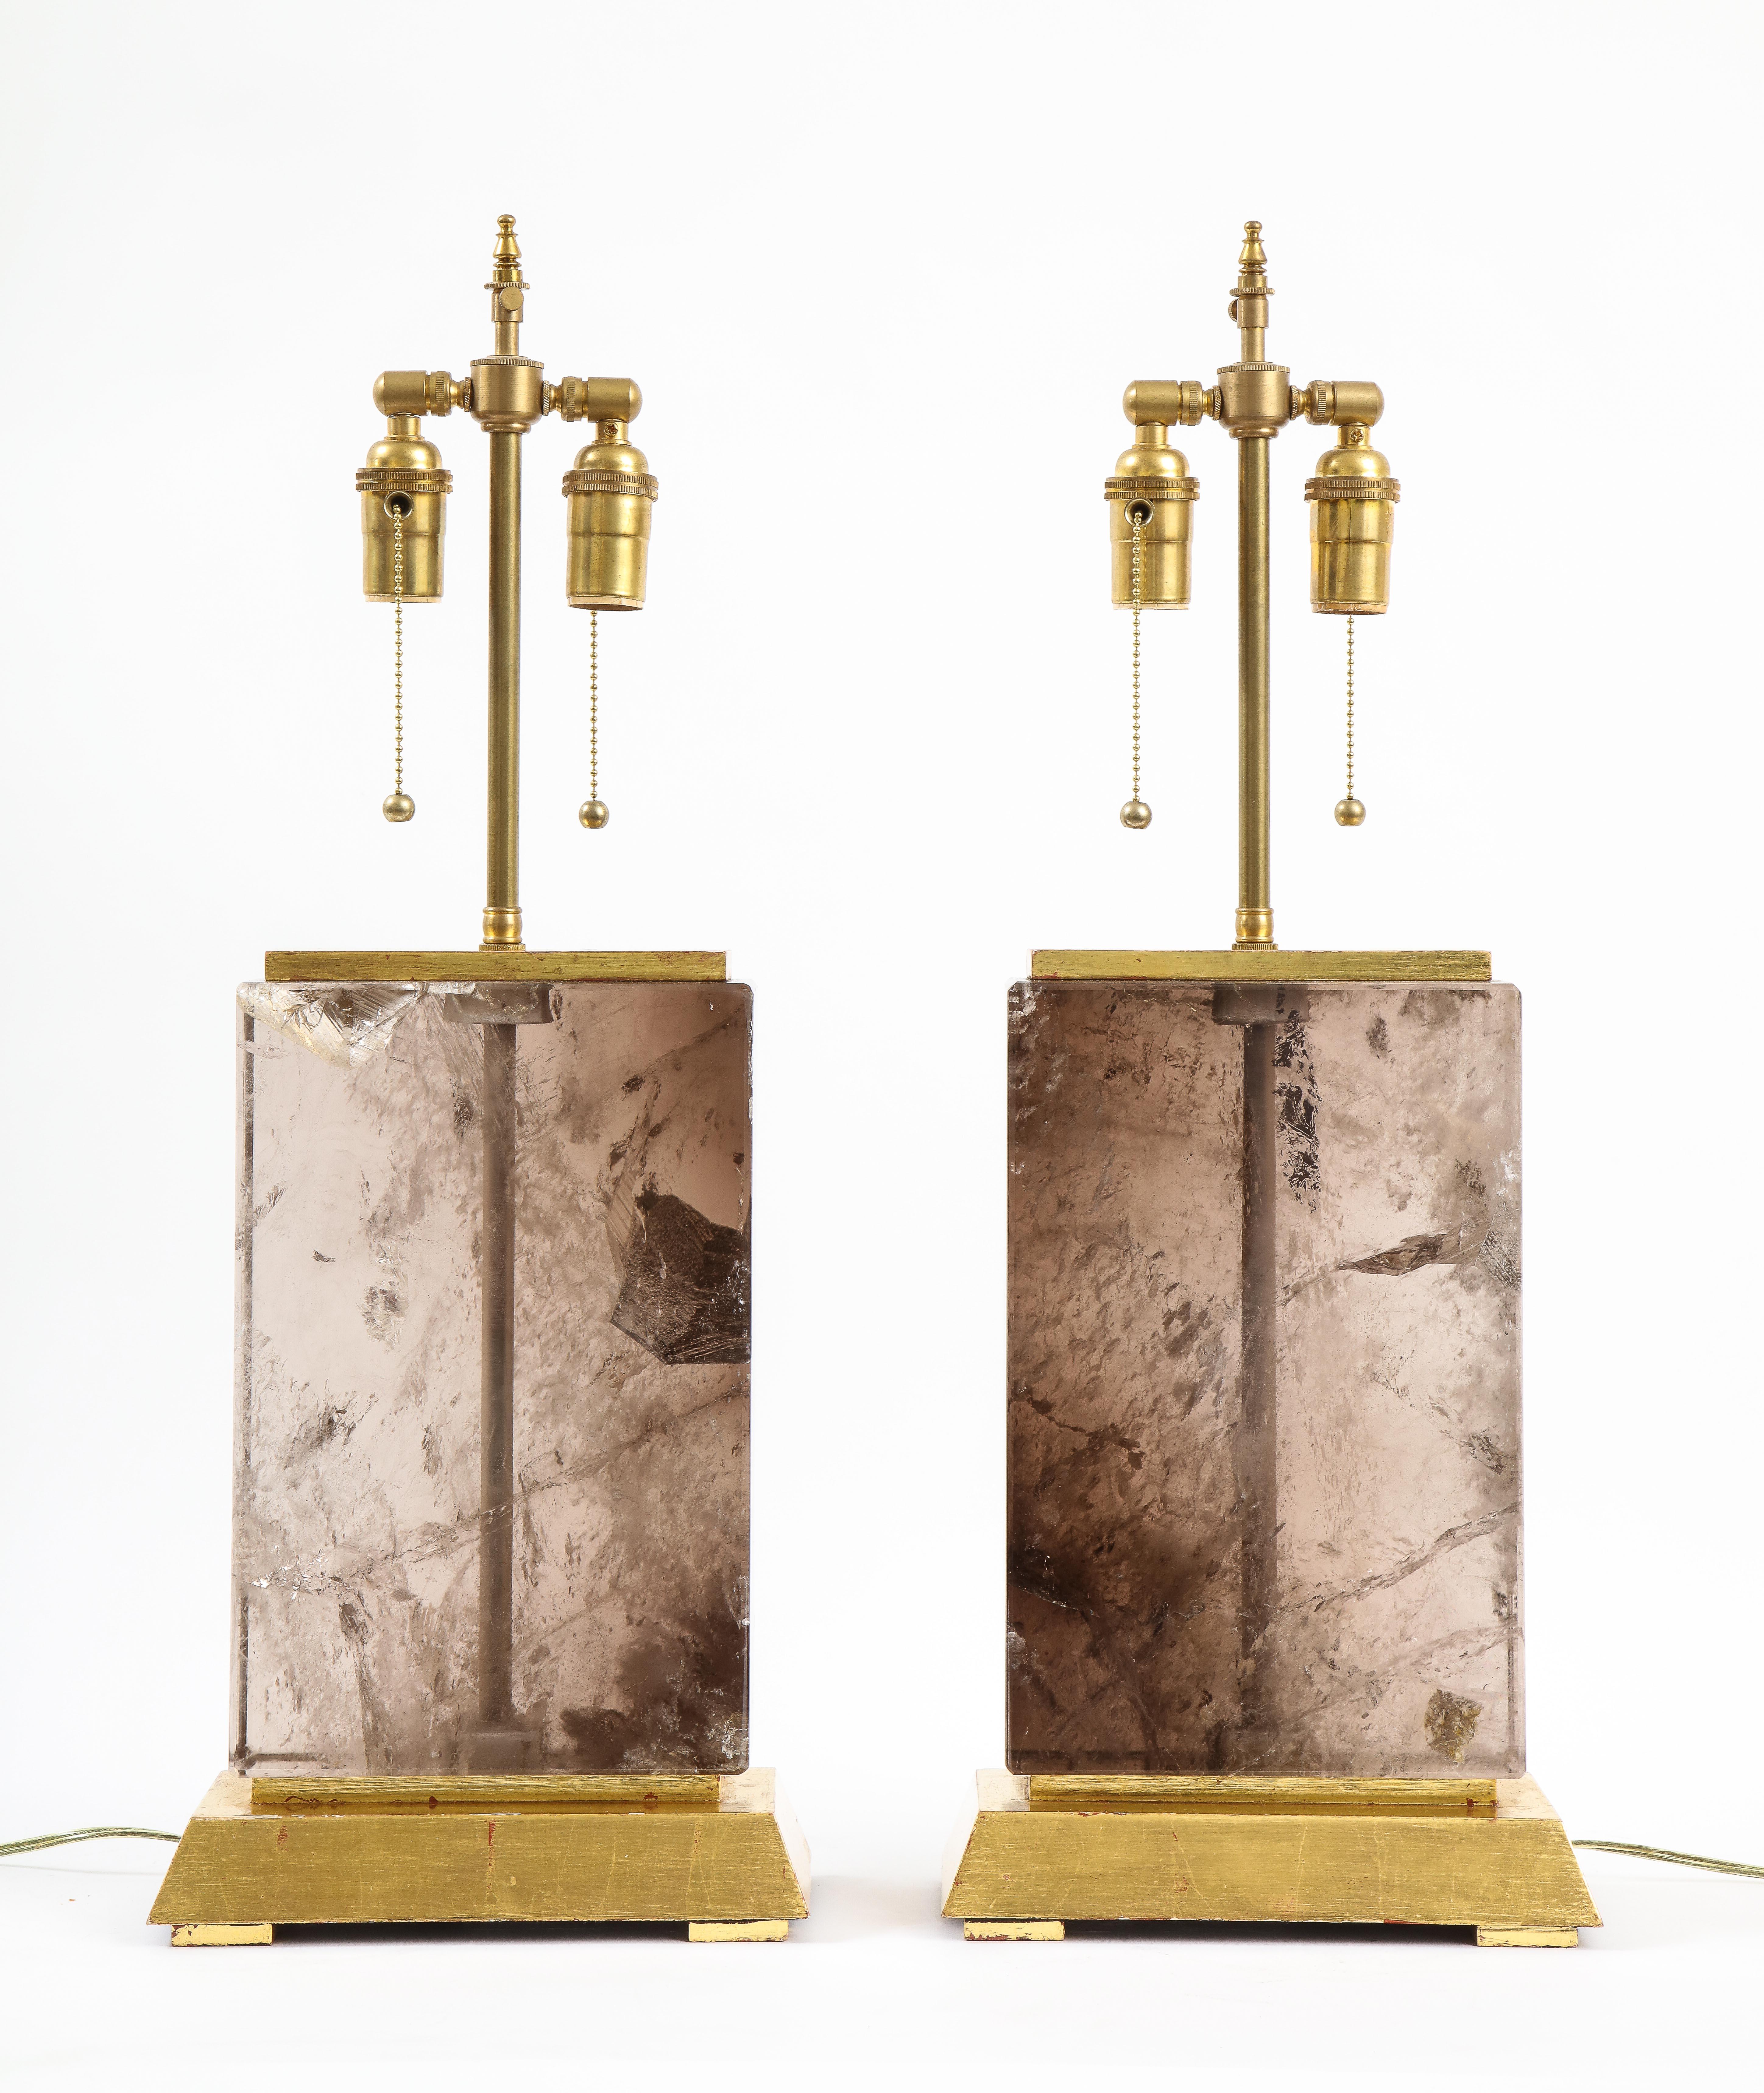 A massive pair of French Natural smokey rock crystal rectangular form lamps with gilt rectangular wood bases. These are truly a gorgeous pair of lamps, with hand-carved and hand-polished smoky rock crystal bodies, each carved out of a single large